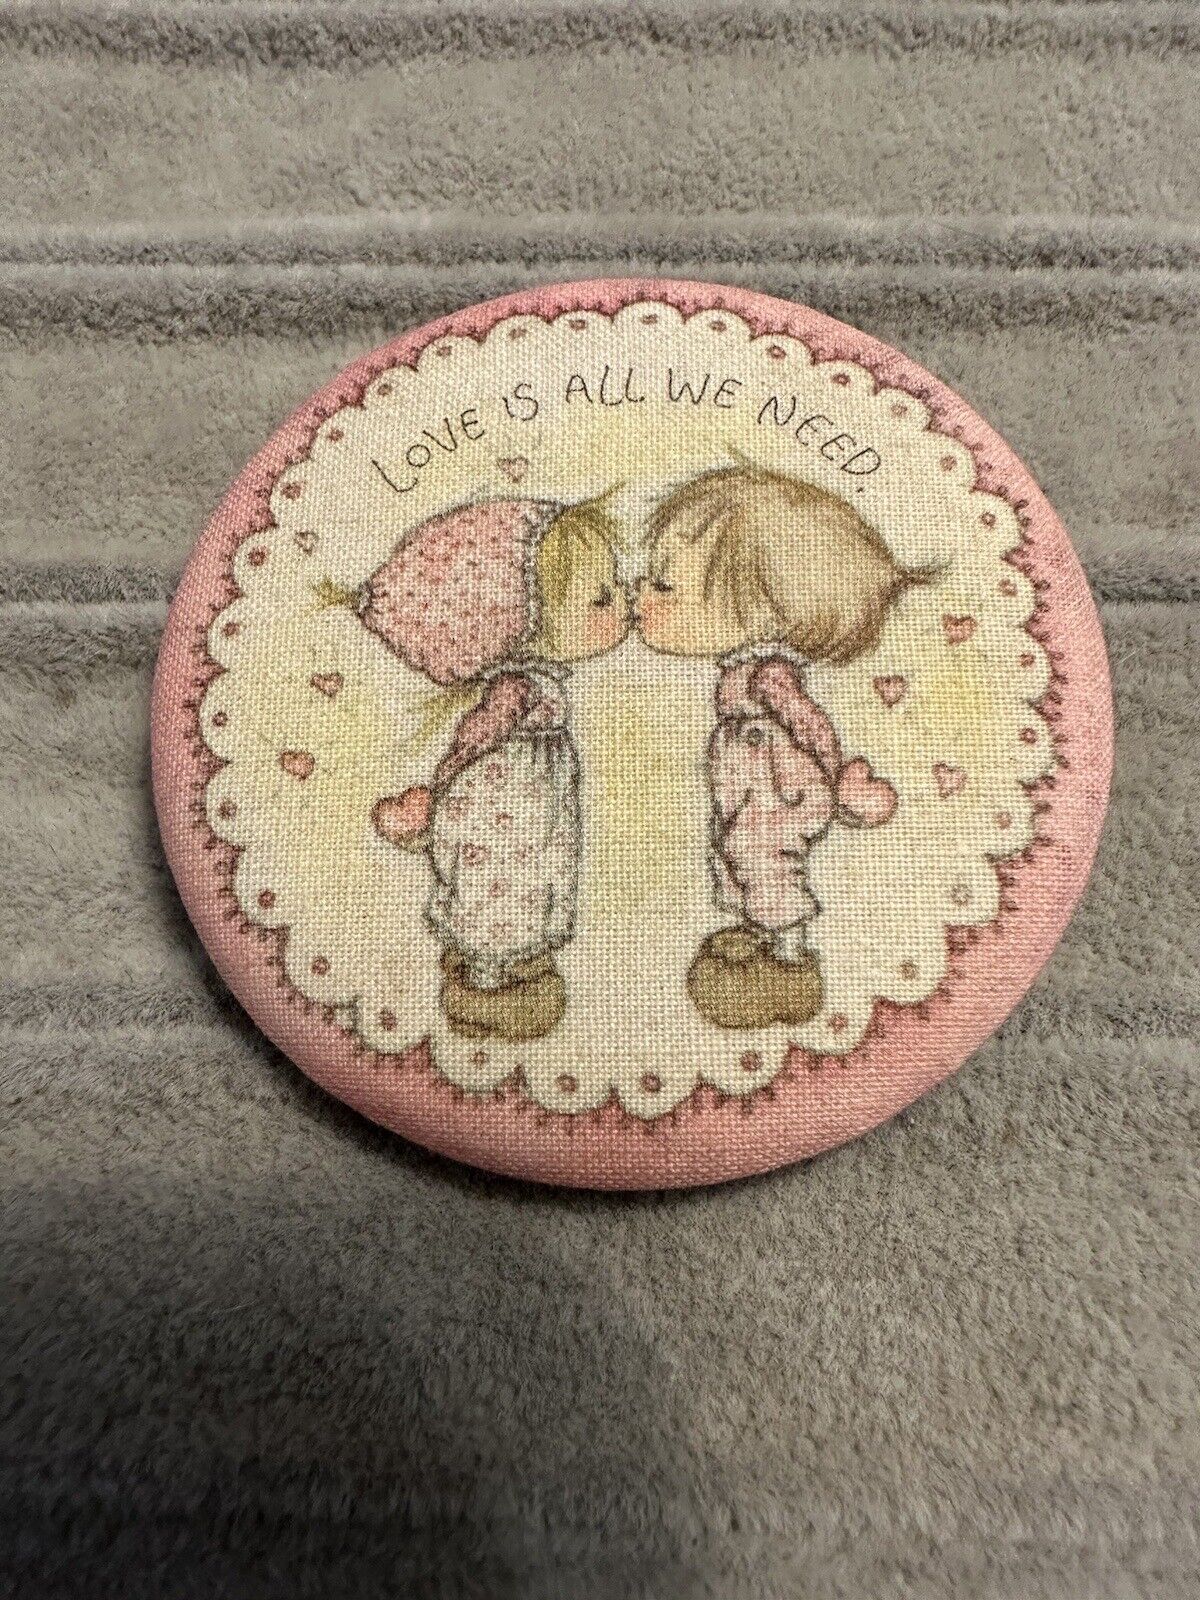 Vintage 73 Hallmark Cards “ Love Is All We Need “ Fabric Pin Back Button 